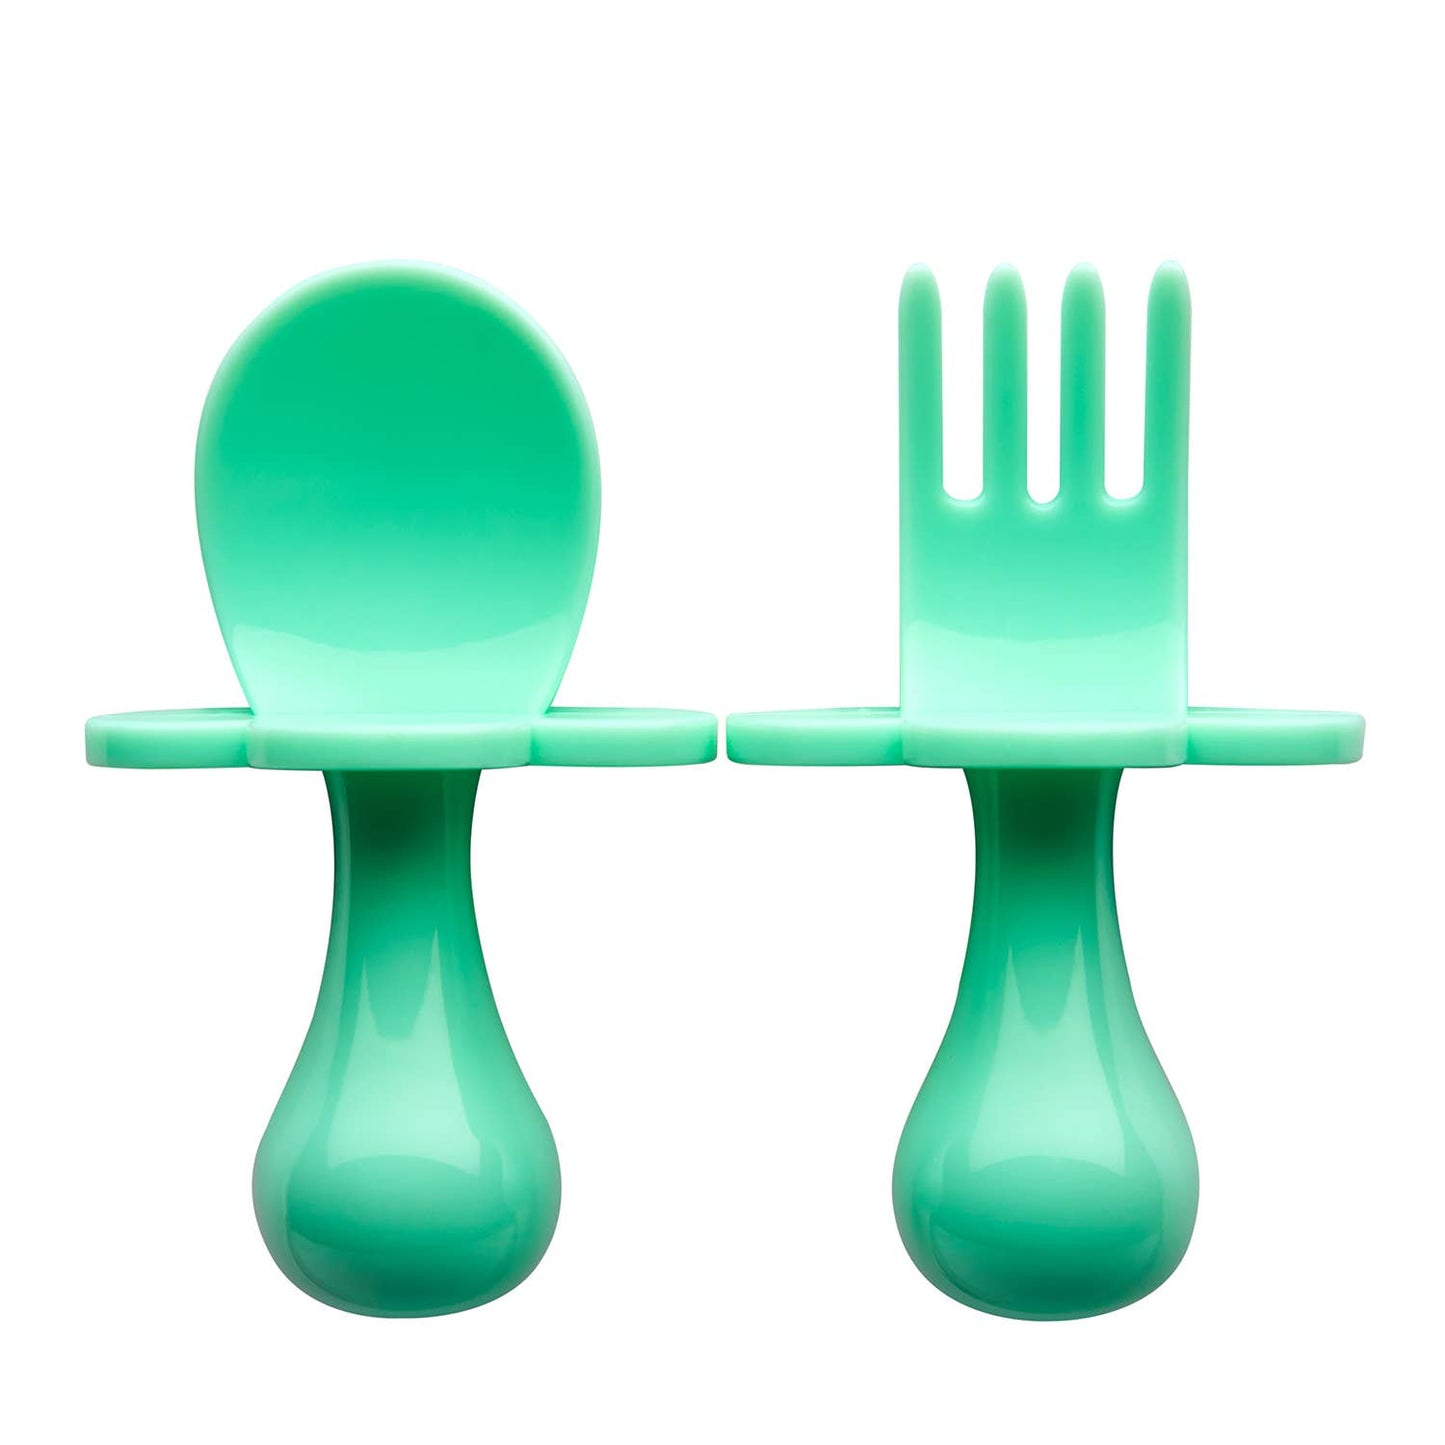 Grabease Utensils - Mint To be